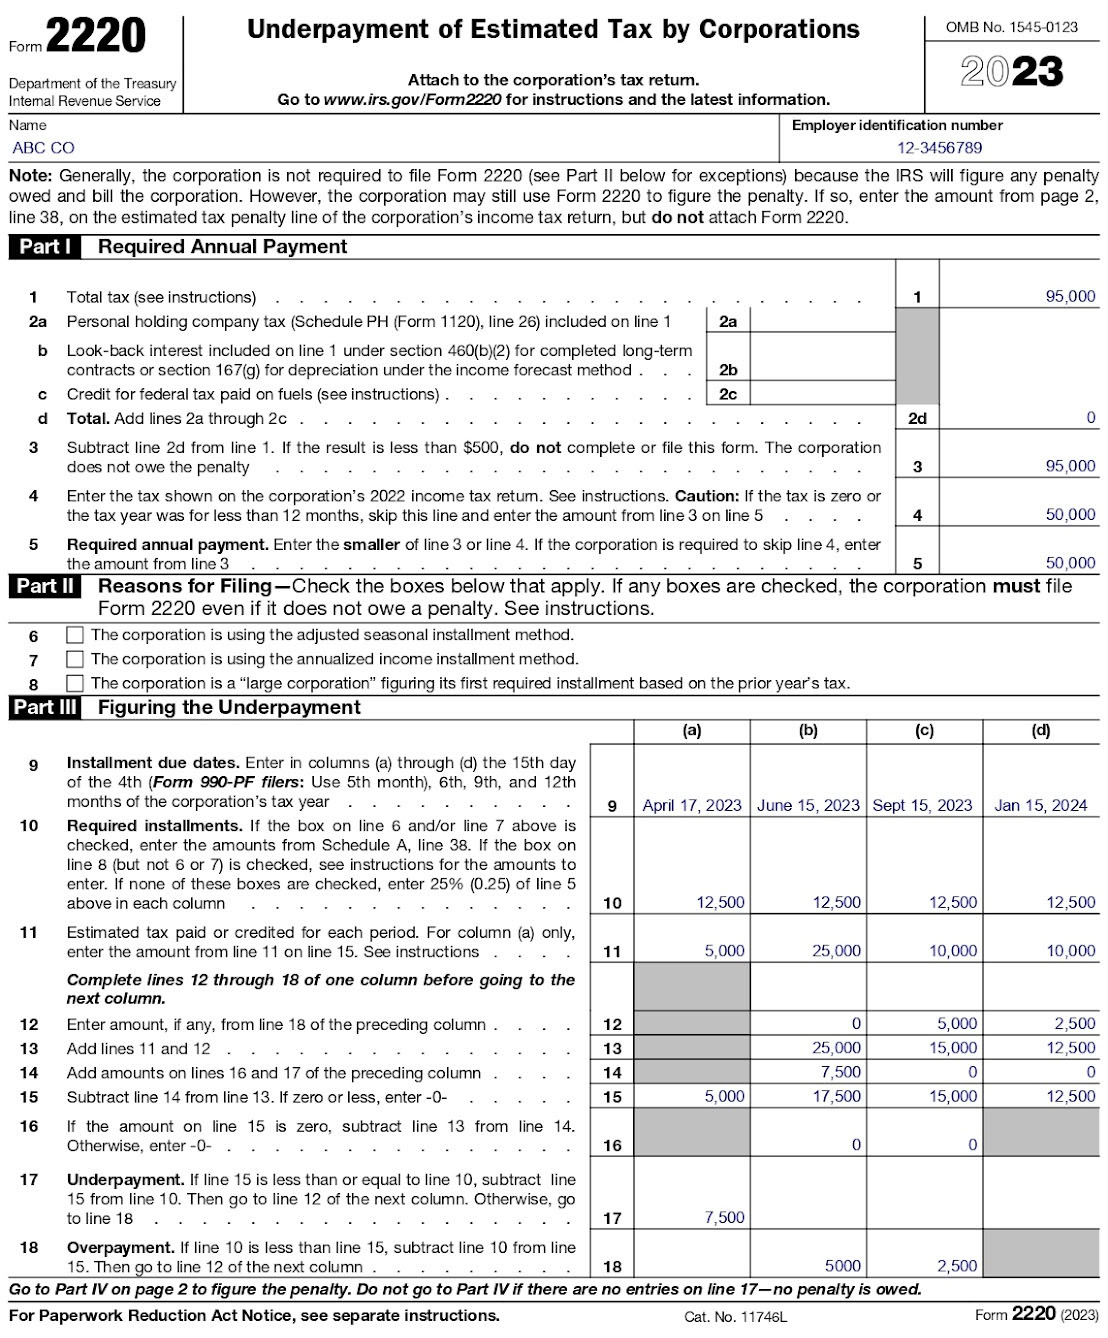 A completed Form 2220, Page 1, with sample data.